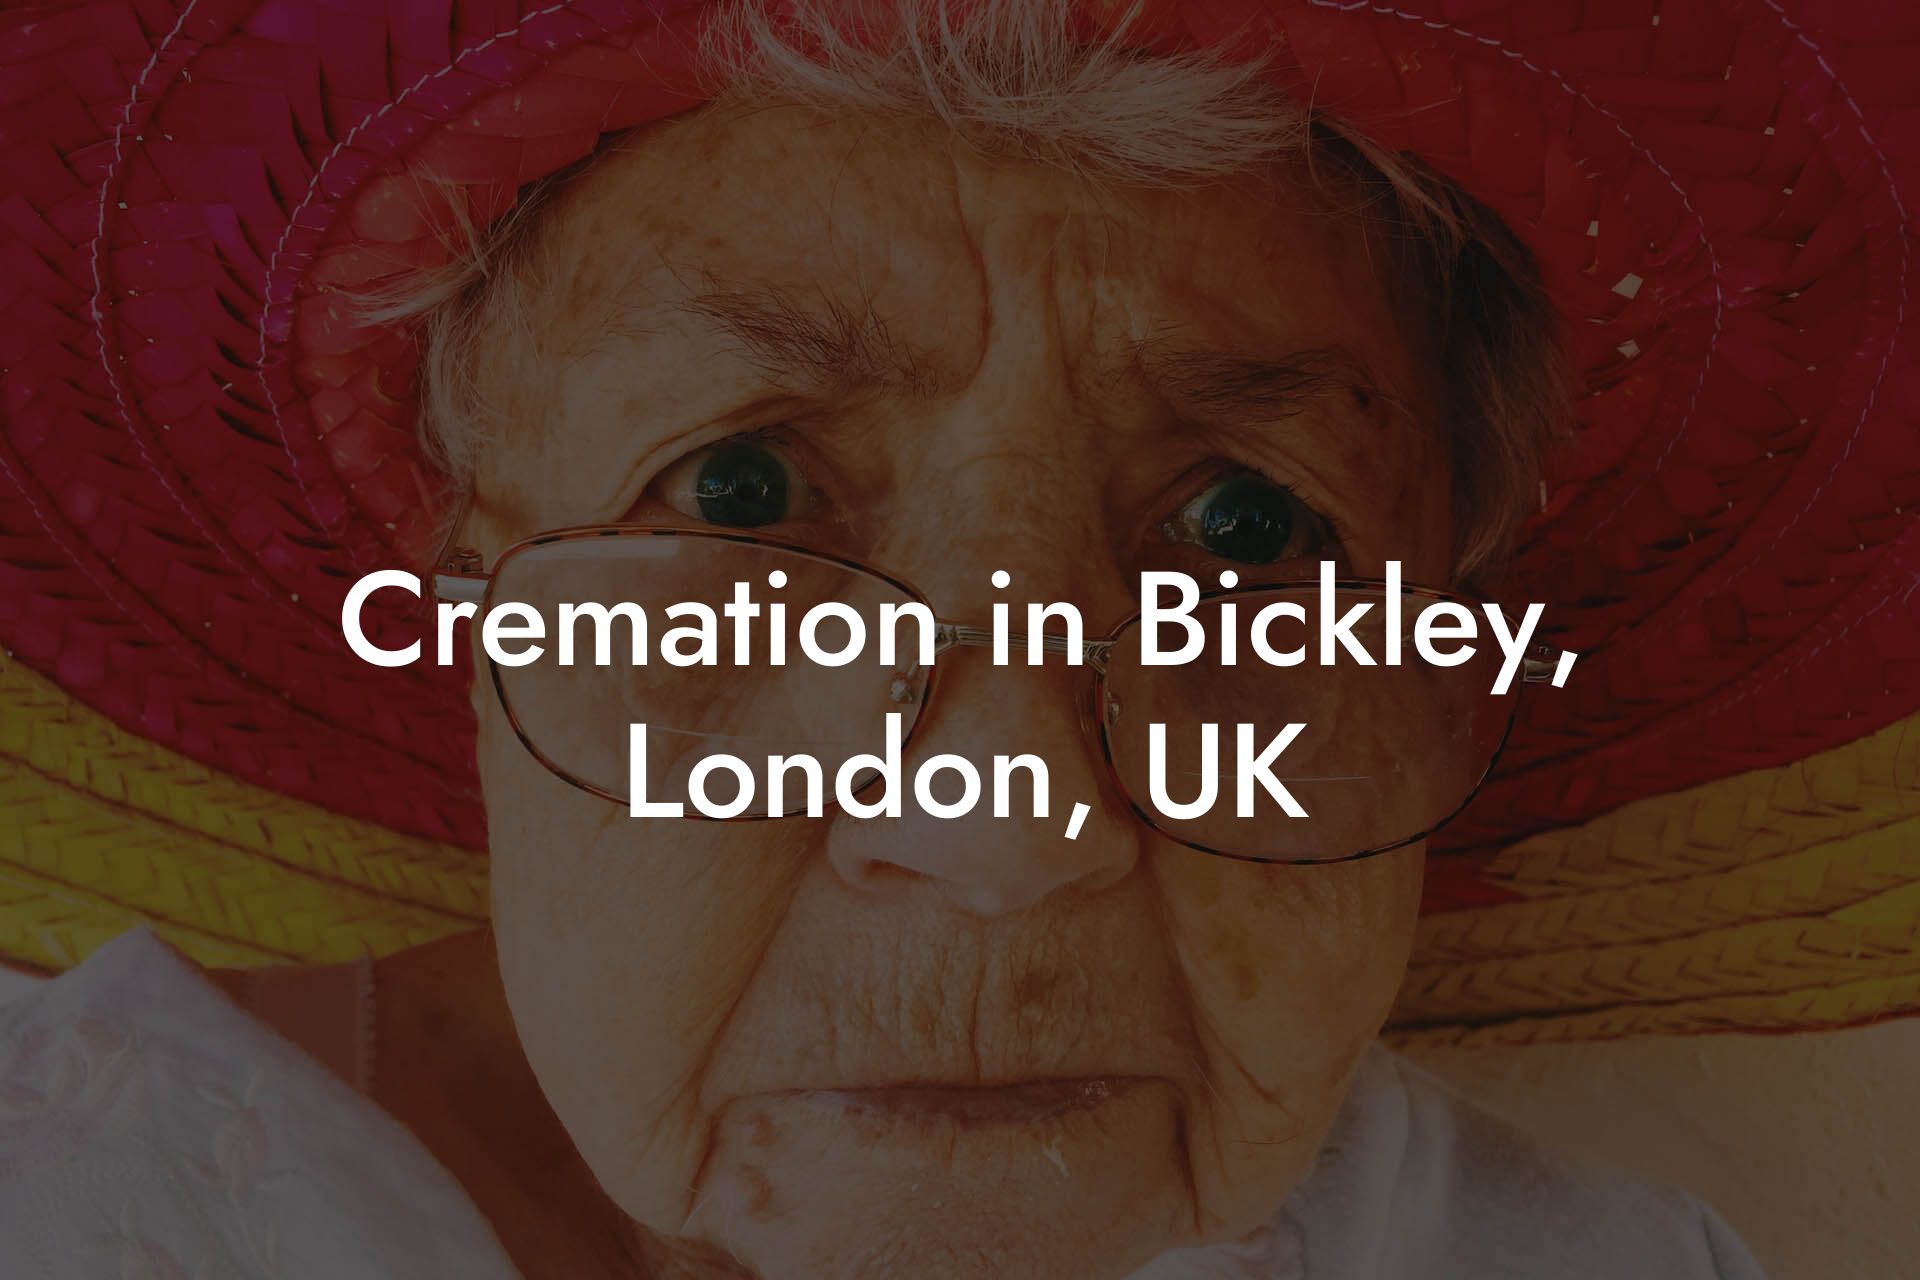 Cremation in Bickley, London, UK